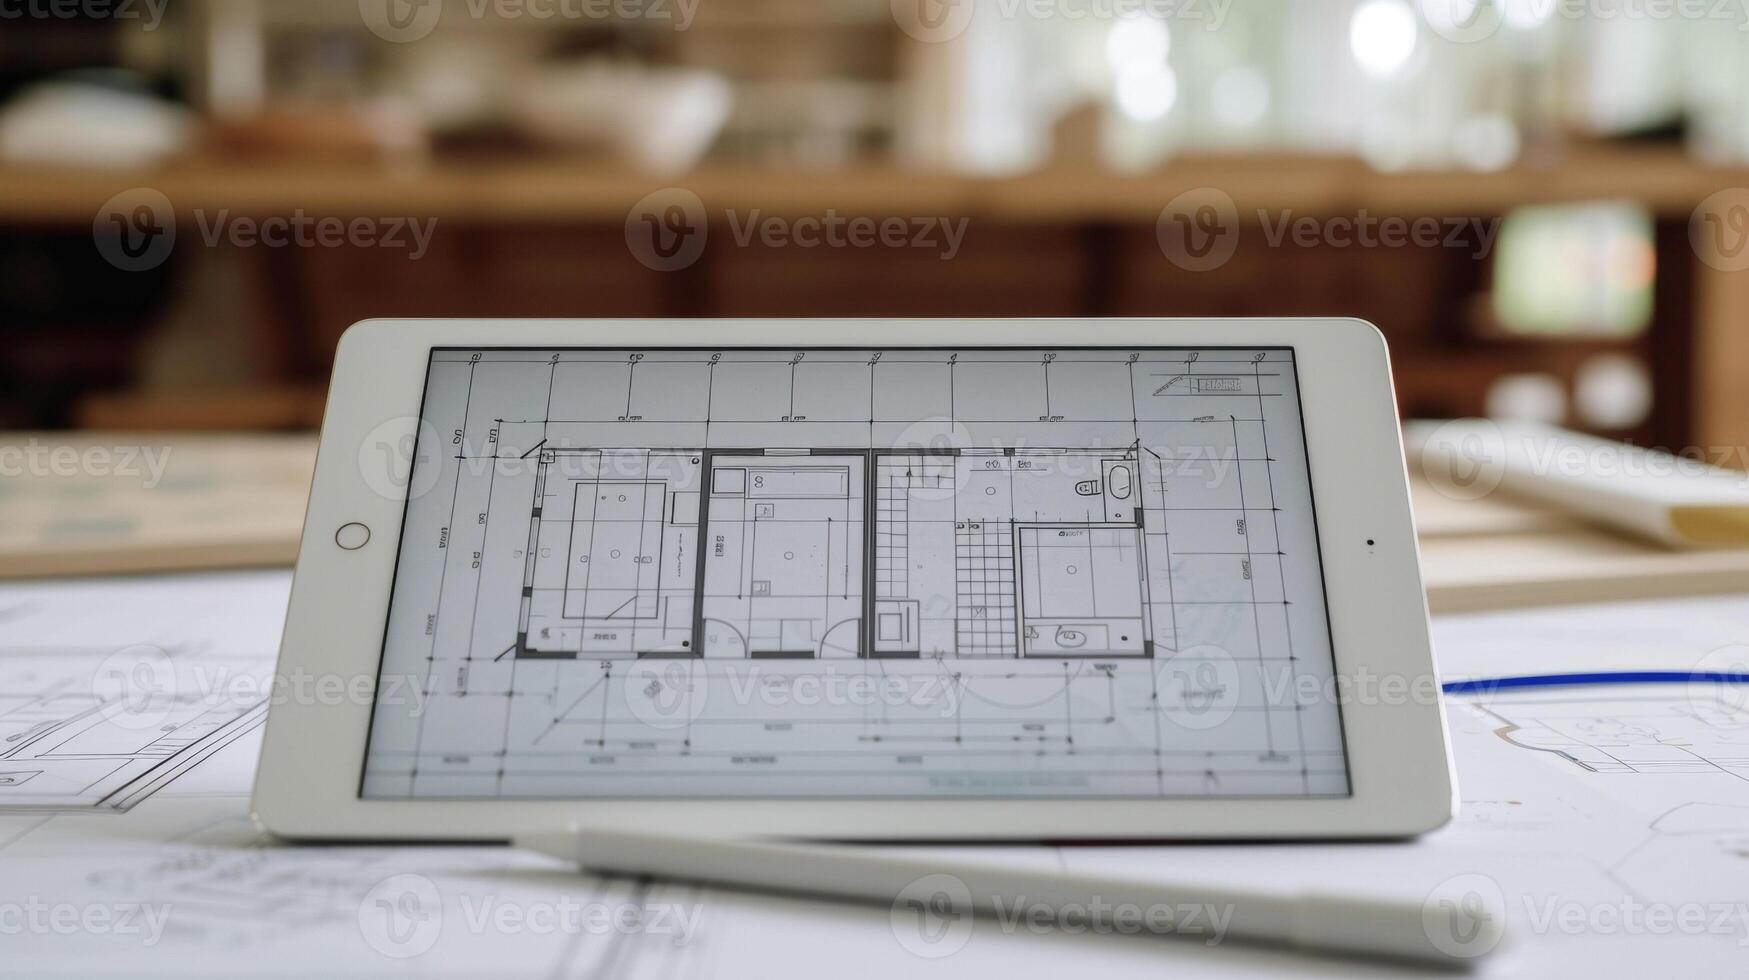 Architectural plans for a home renovation displayed on a tablet with measurements and annotations clearly visible photo